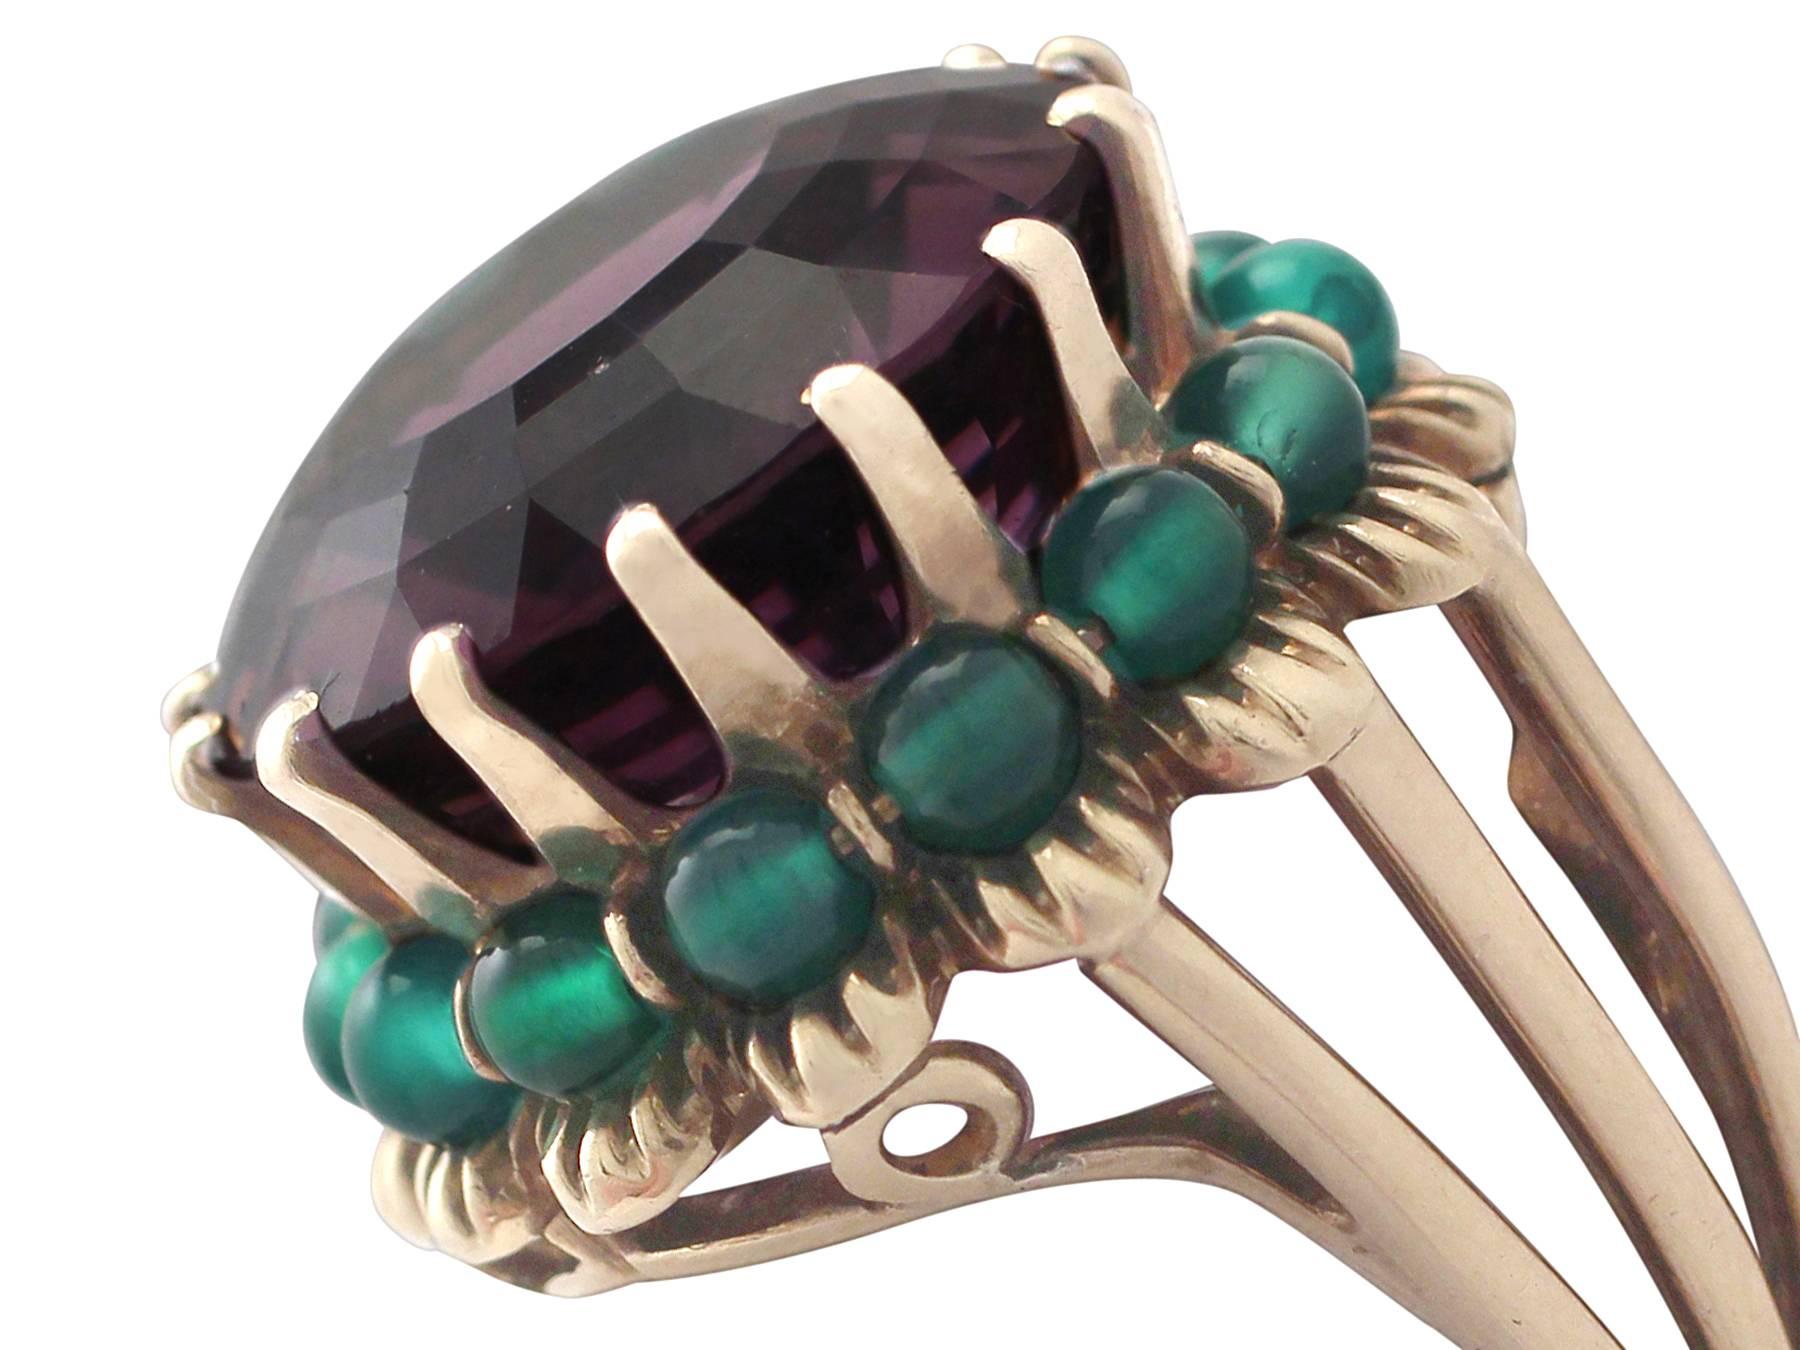 A fine and impressive 19.48 carat amethyst and green paste, 14 karat yellow gold dress ring in the Art Deco style; part of our diverse vintage jewelry and estate jewelry collections

This fine and impressive vintage amethyst cocktail ring has been